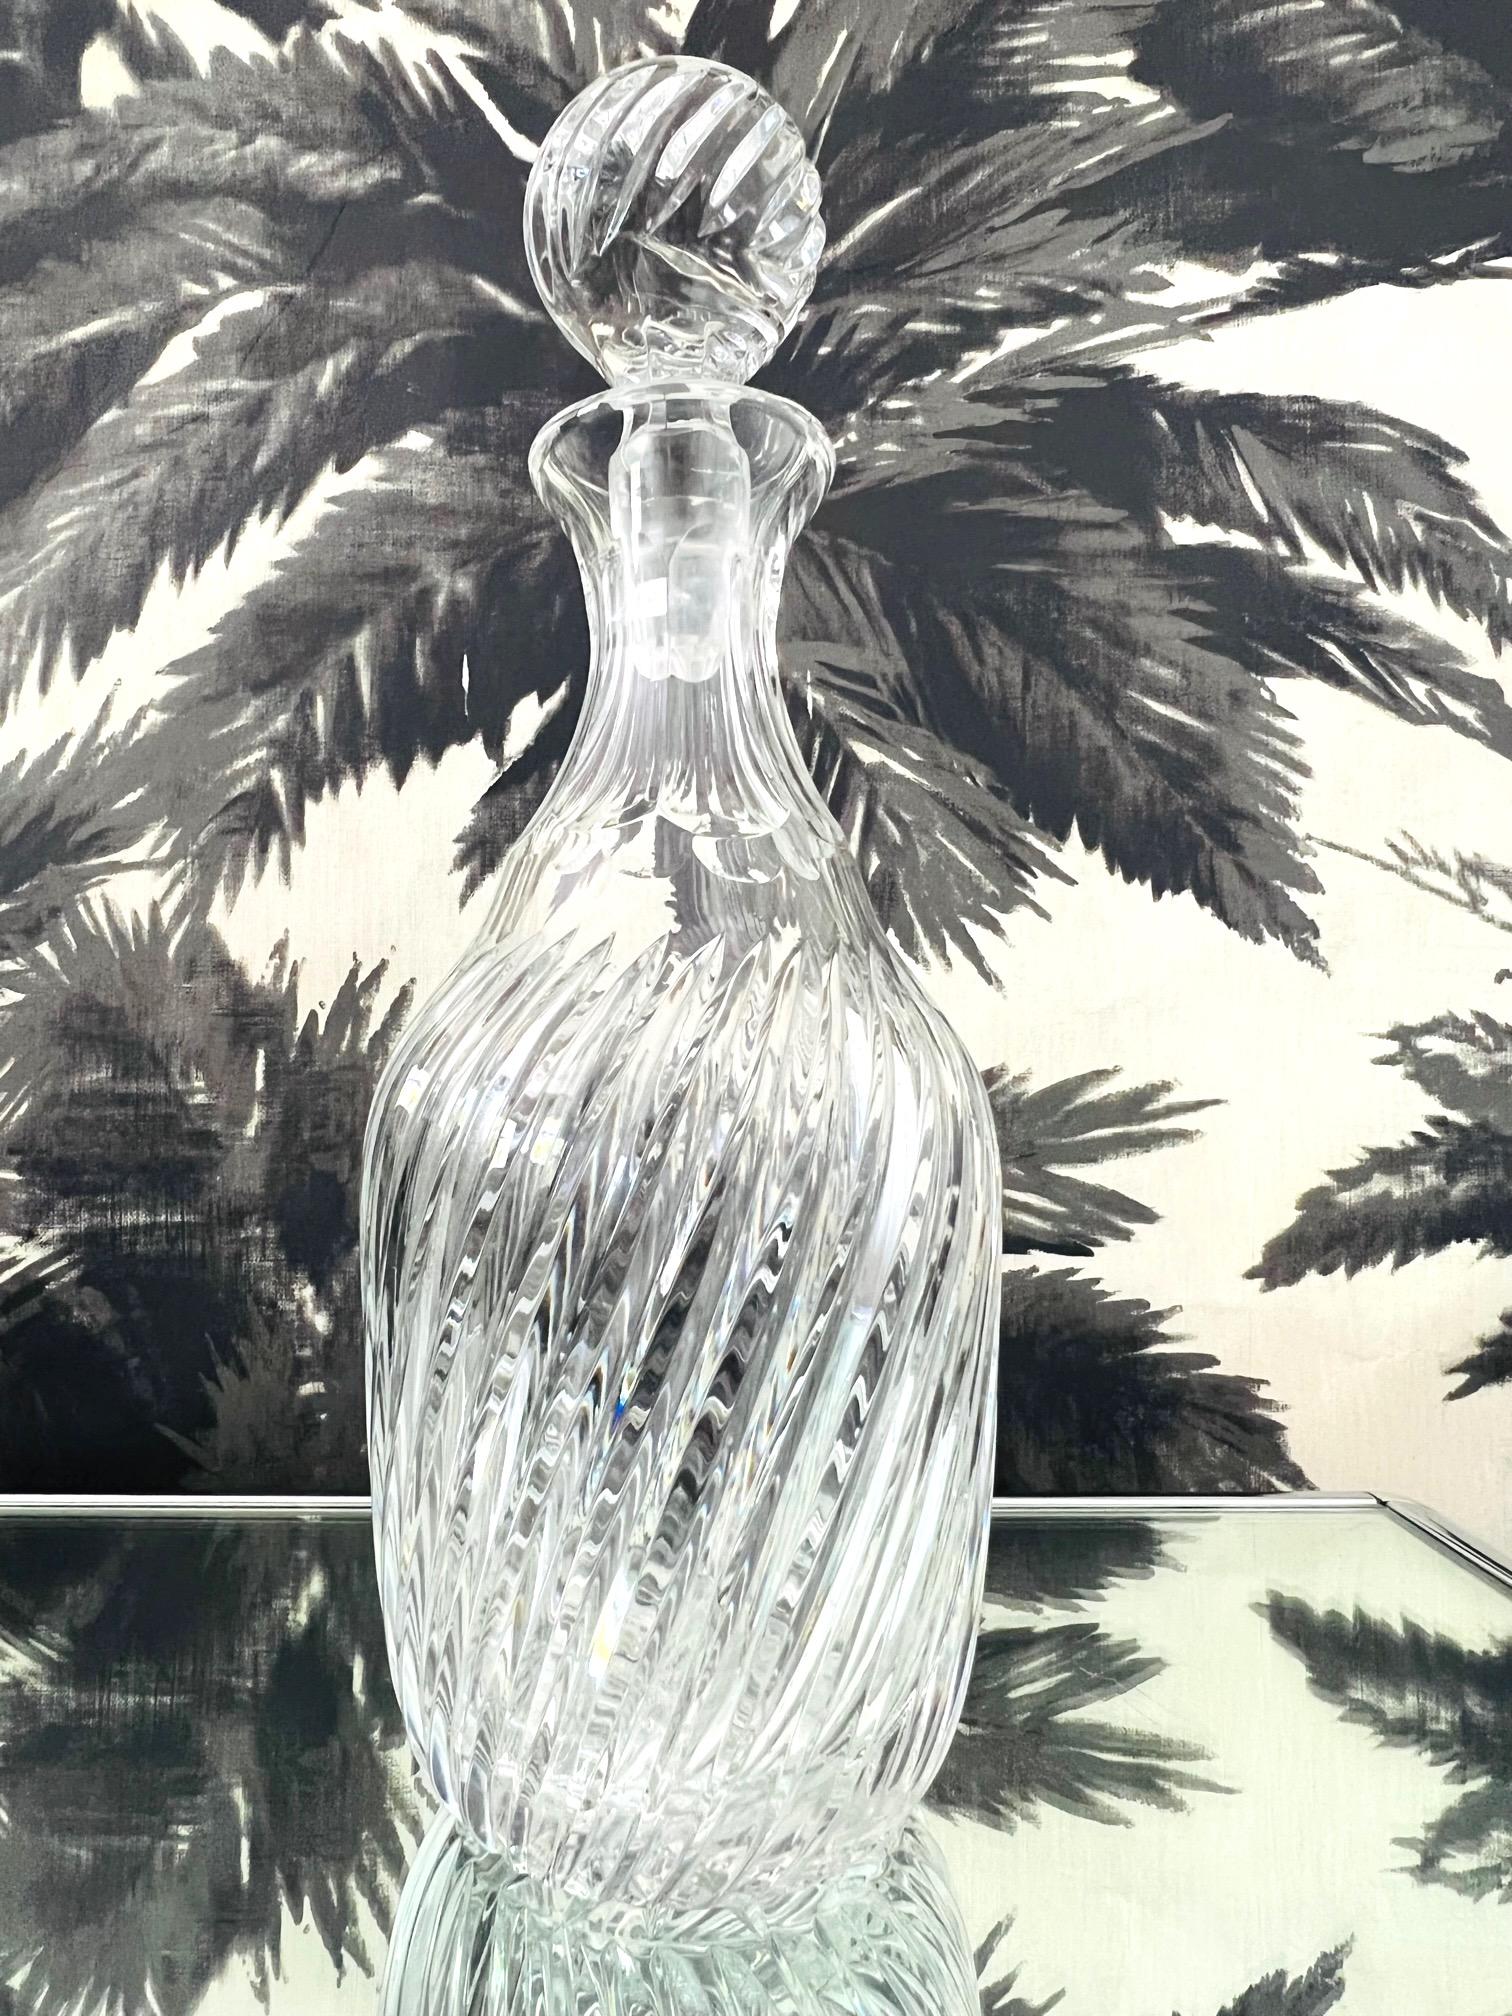 Regency Vintage French Crystal Decanter with Hand-Cut Swirl Designs, c. 1970's